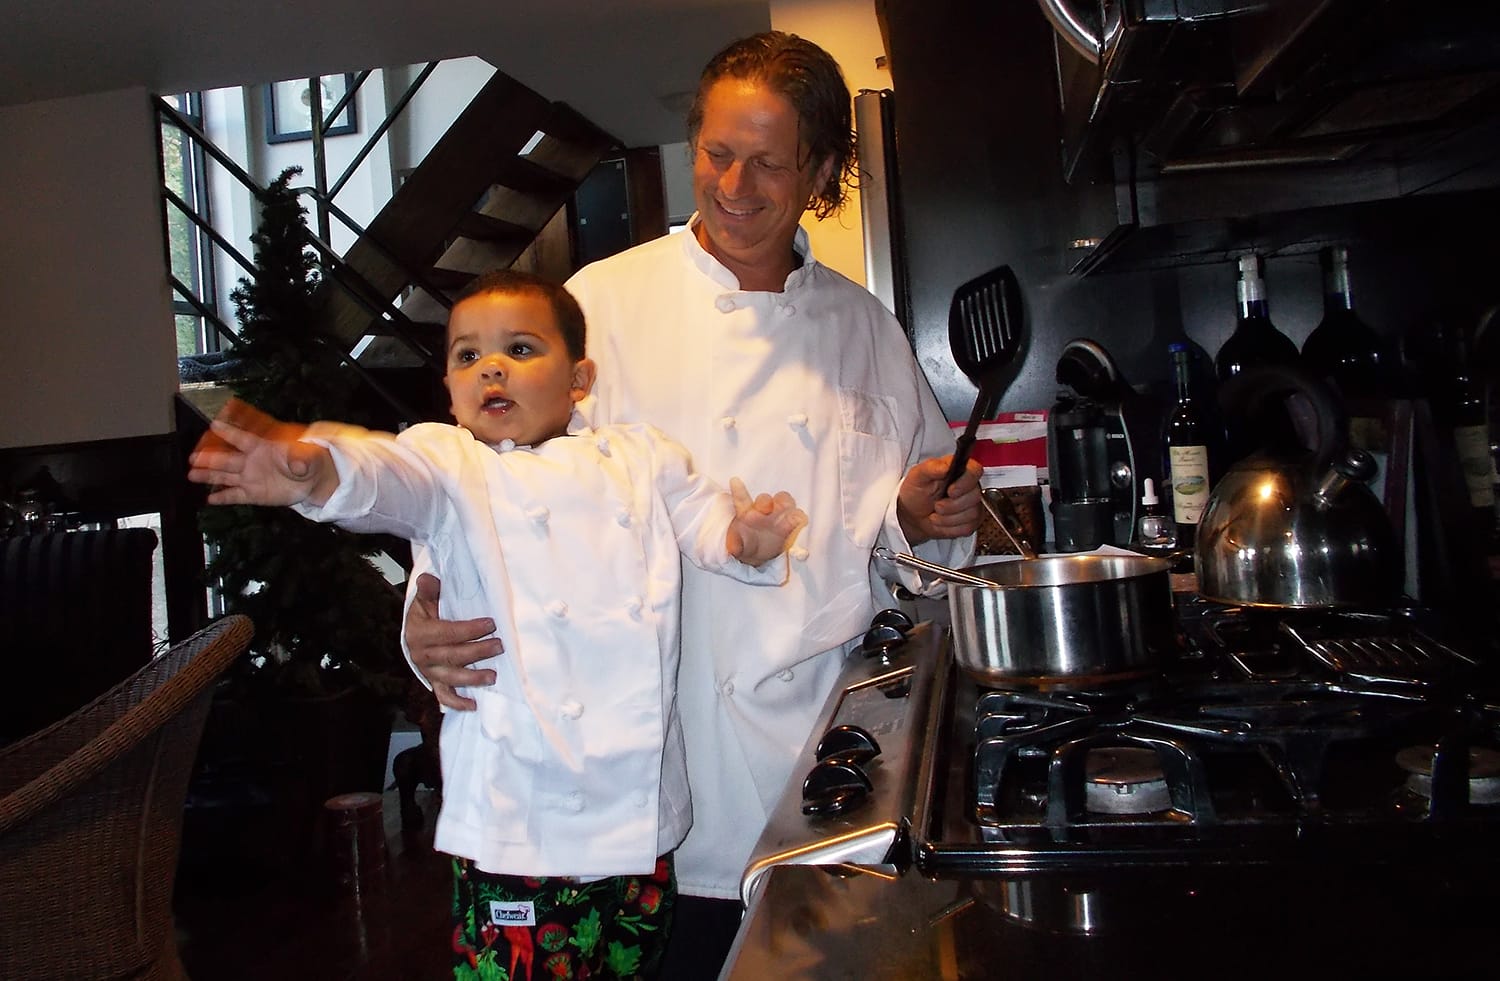 Chez Vous owner, Ettore Mazzei, and his grandson Giancarlo having a private cooking lesson